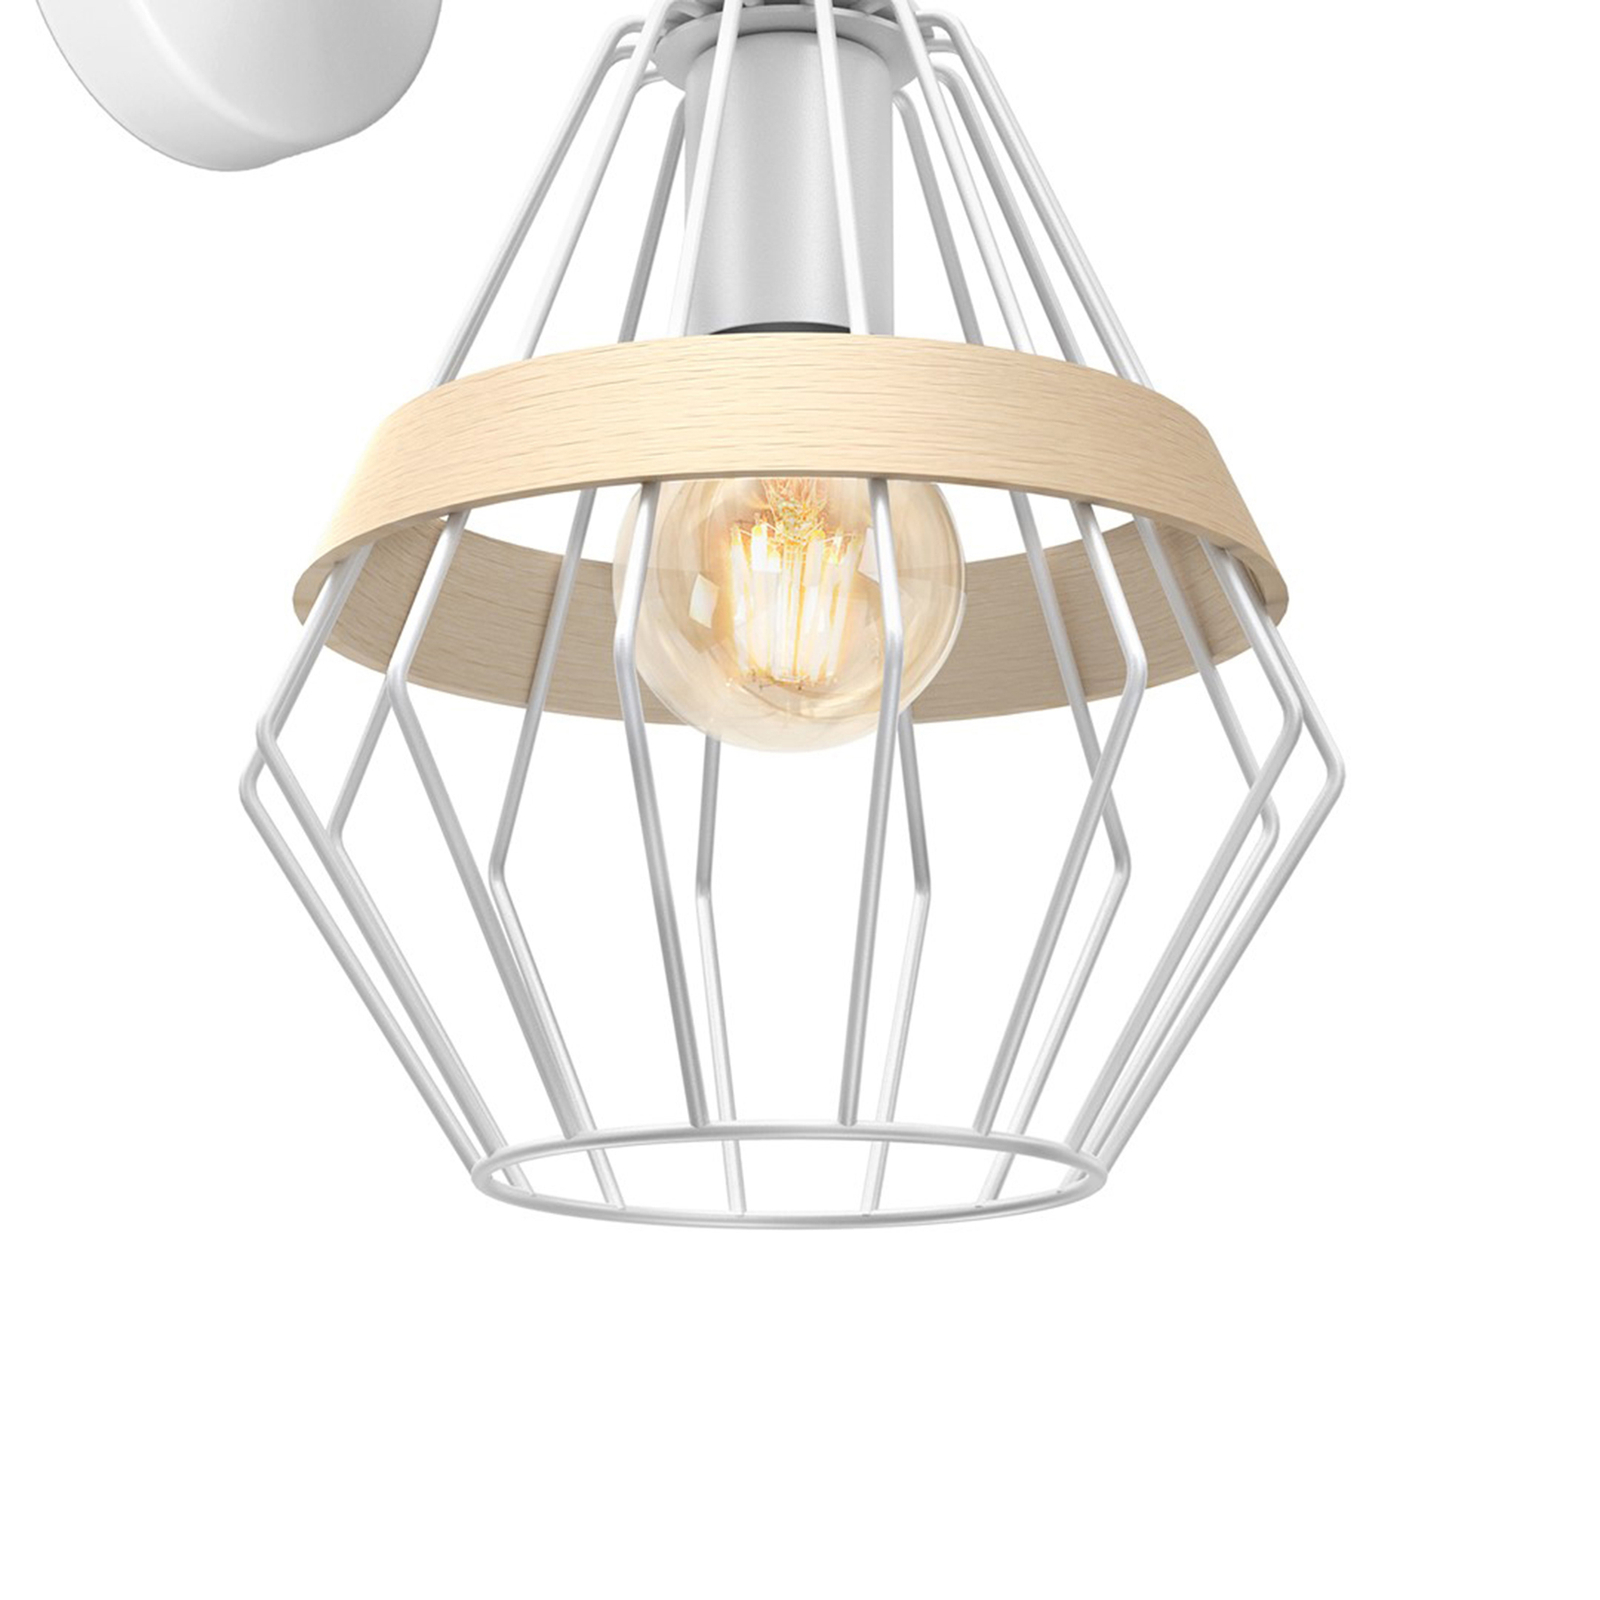 Cliff wall light, cage lampshade wooden band white